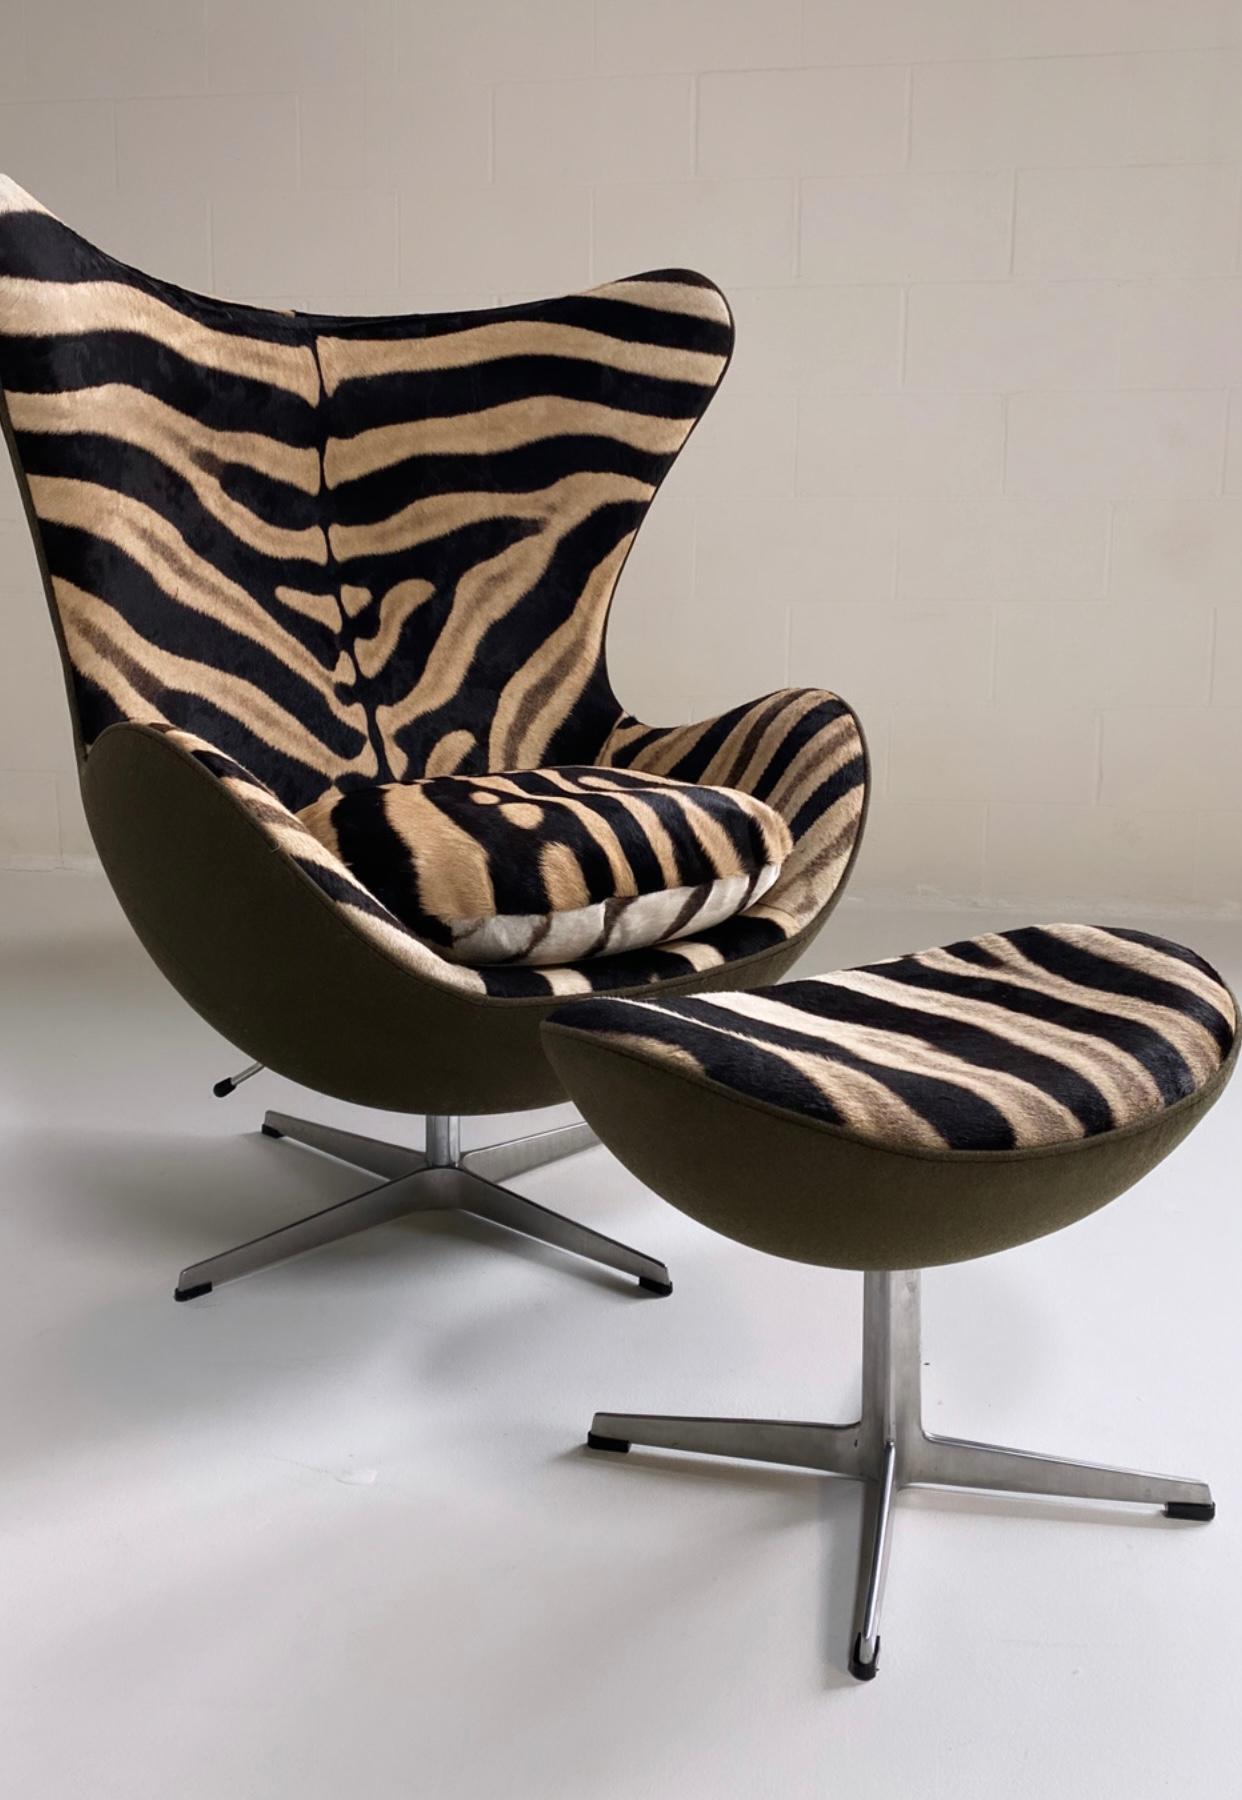 We have an incredible collection of vintage chairs and design icons waiting for a new life. Our authentic, upcylced Egg Chairs are some of our most popular designs. 

This egg chair and Ottoman will be made to order and restored in zebra hide and